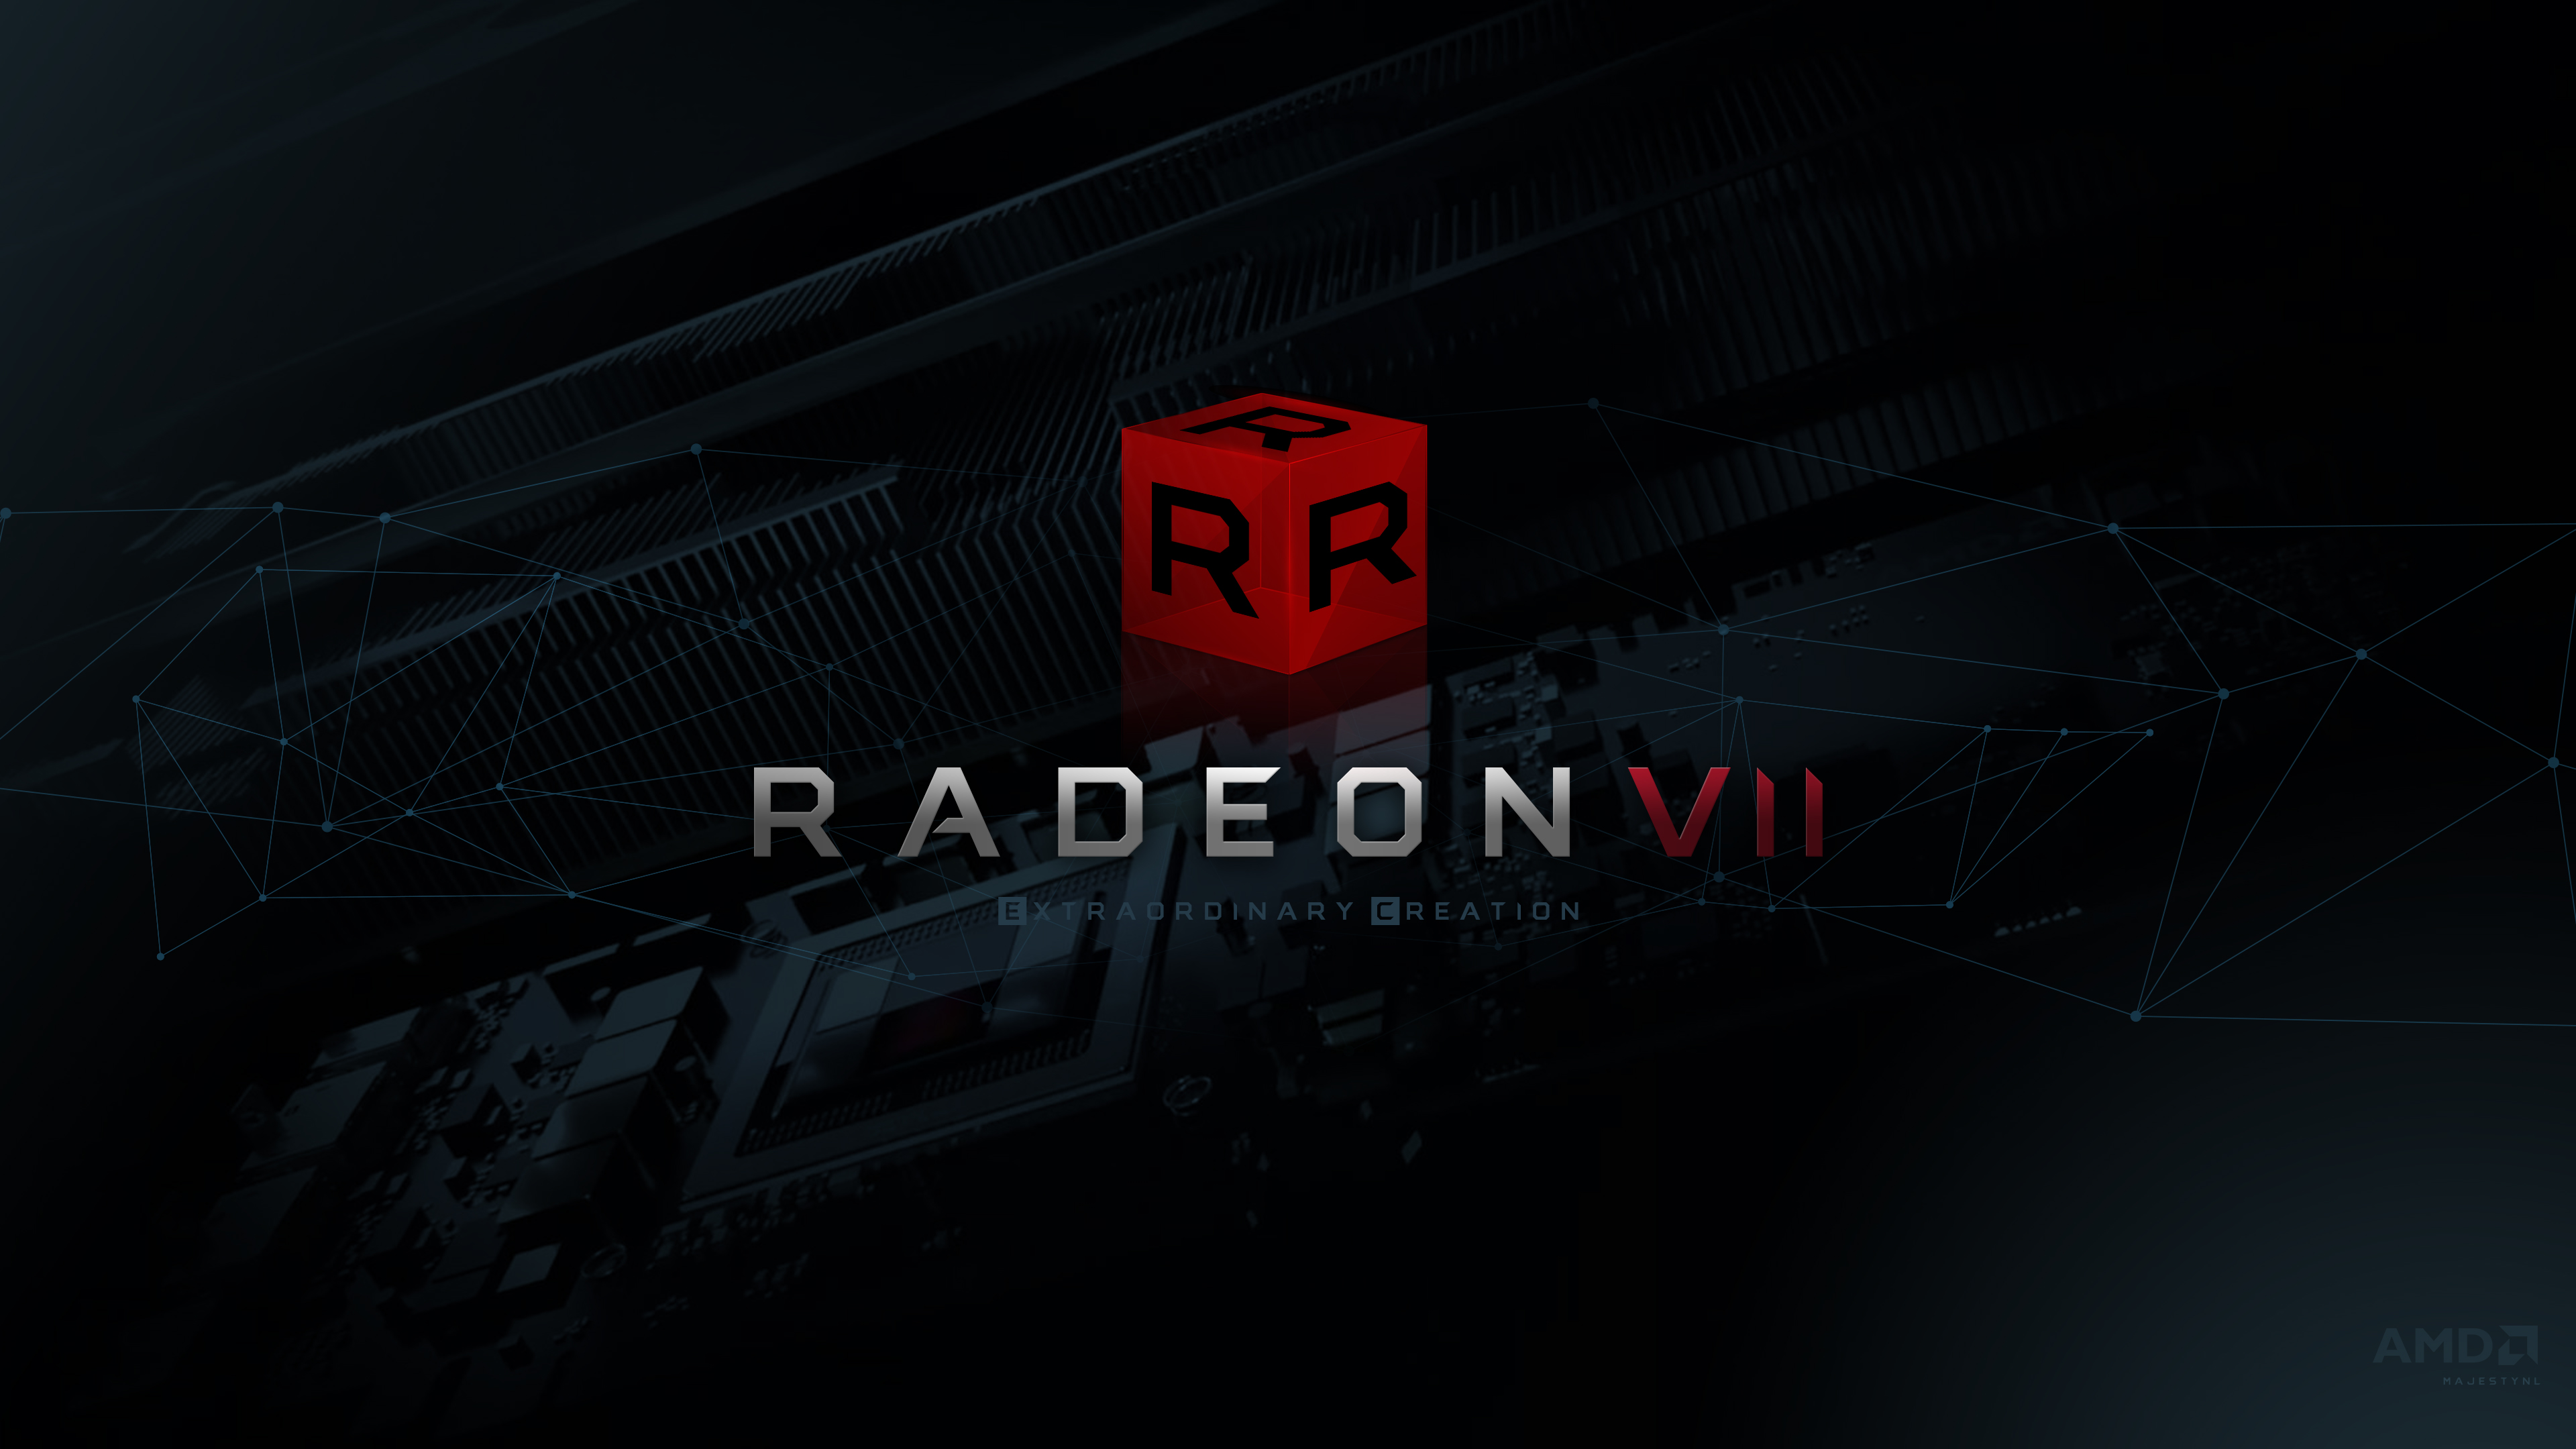 Radeon VII Wallpaper for those who are interested